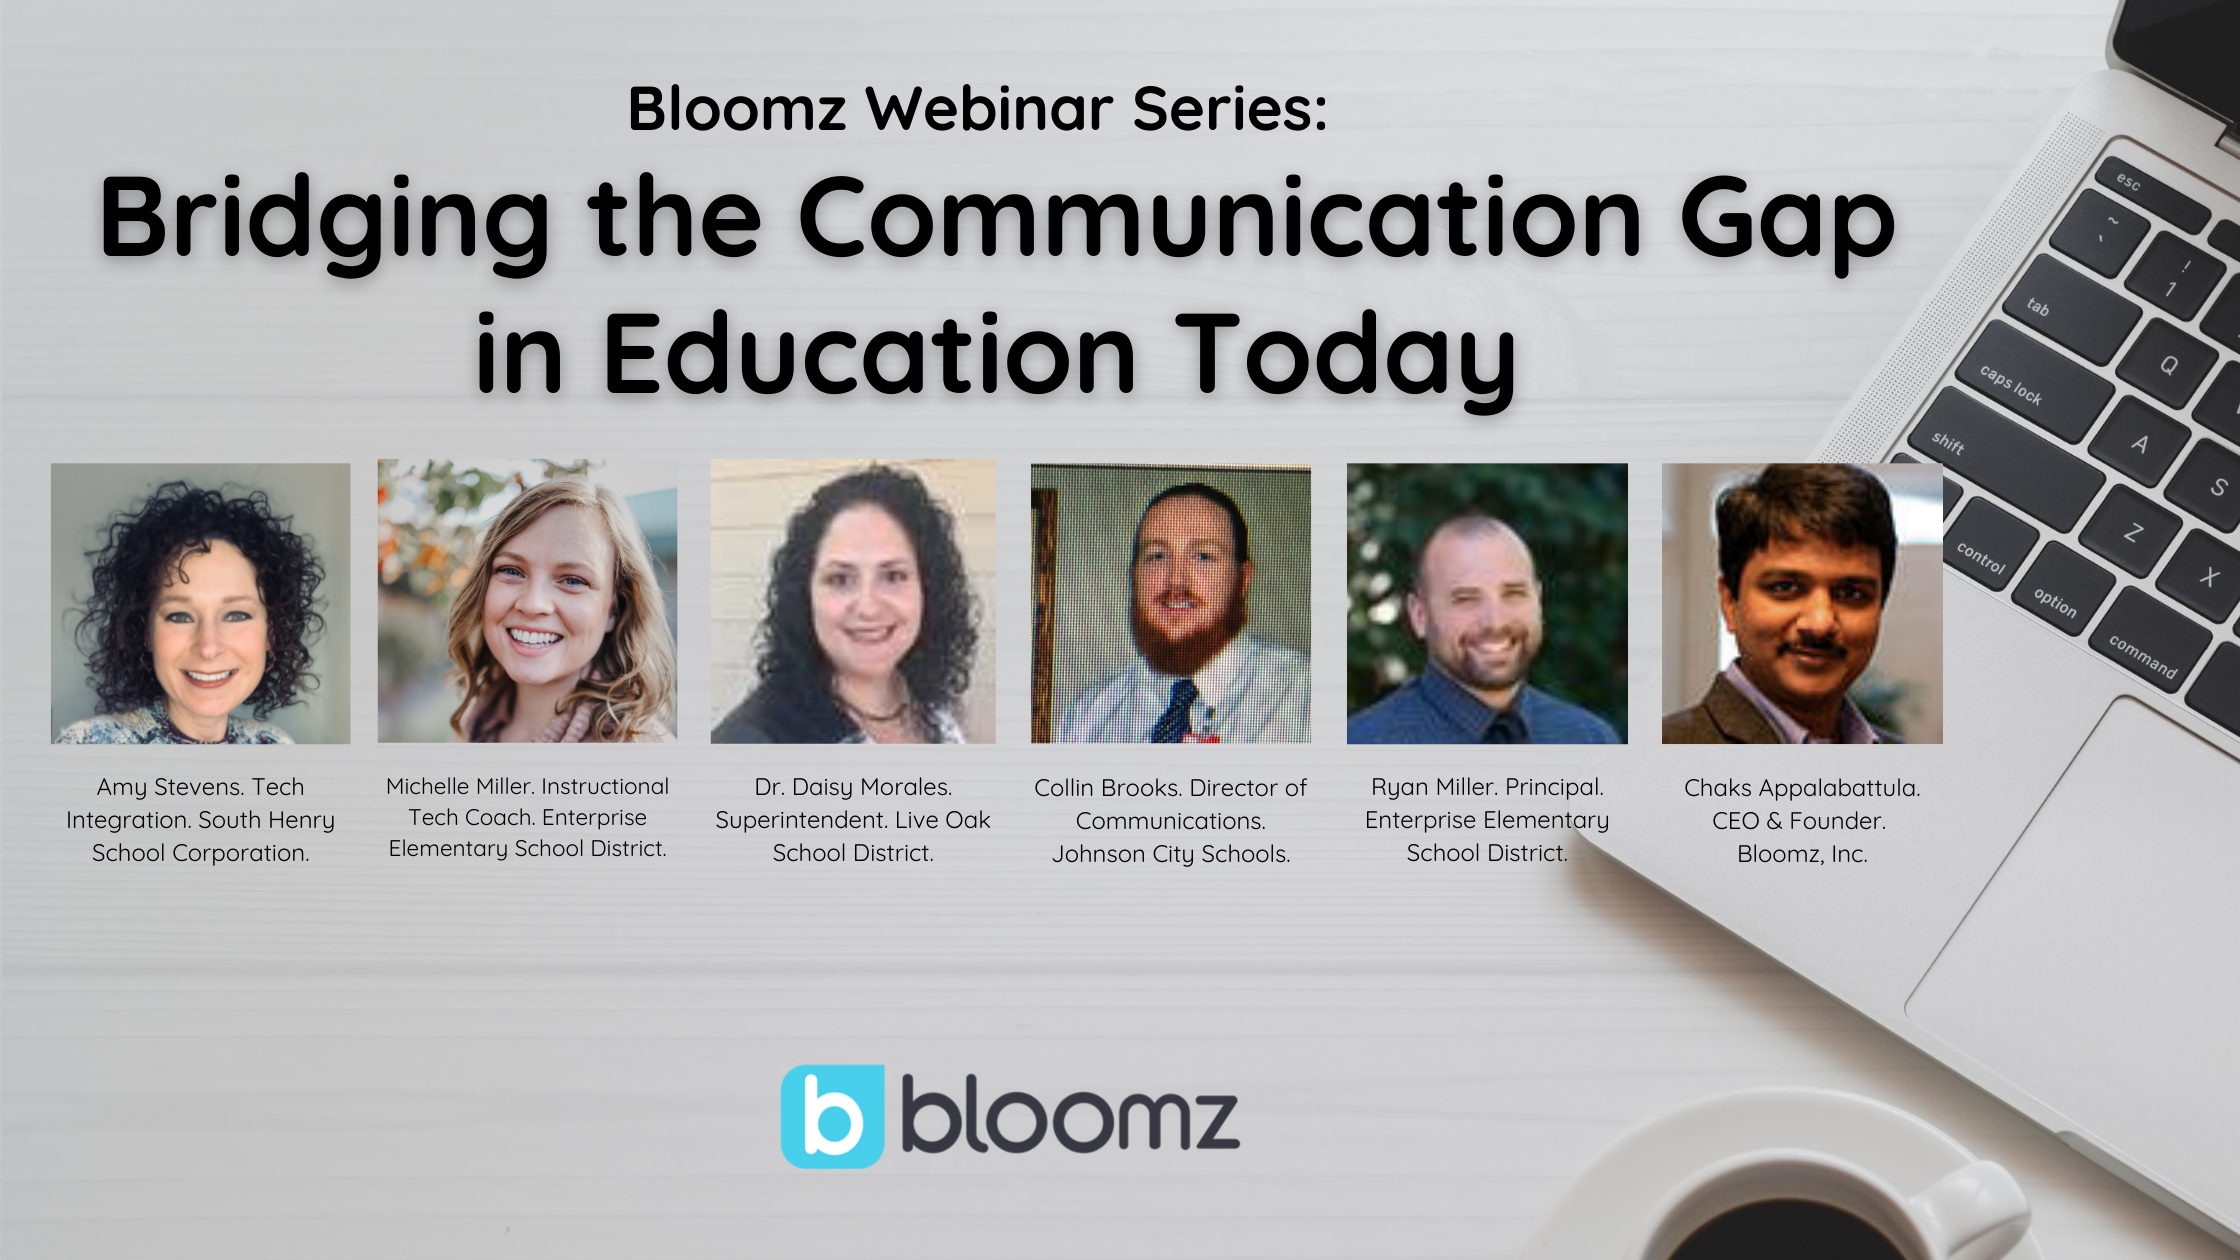 Recording Access-Bloomz Webinar Series: Bridging the Communication Gap in Education Today